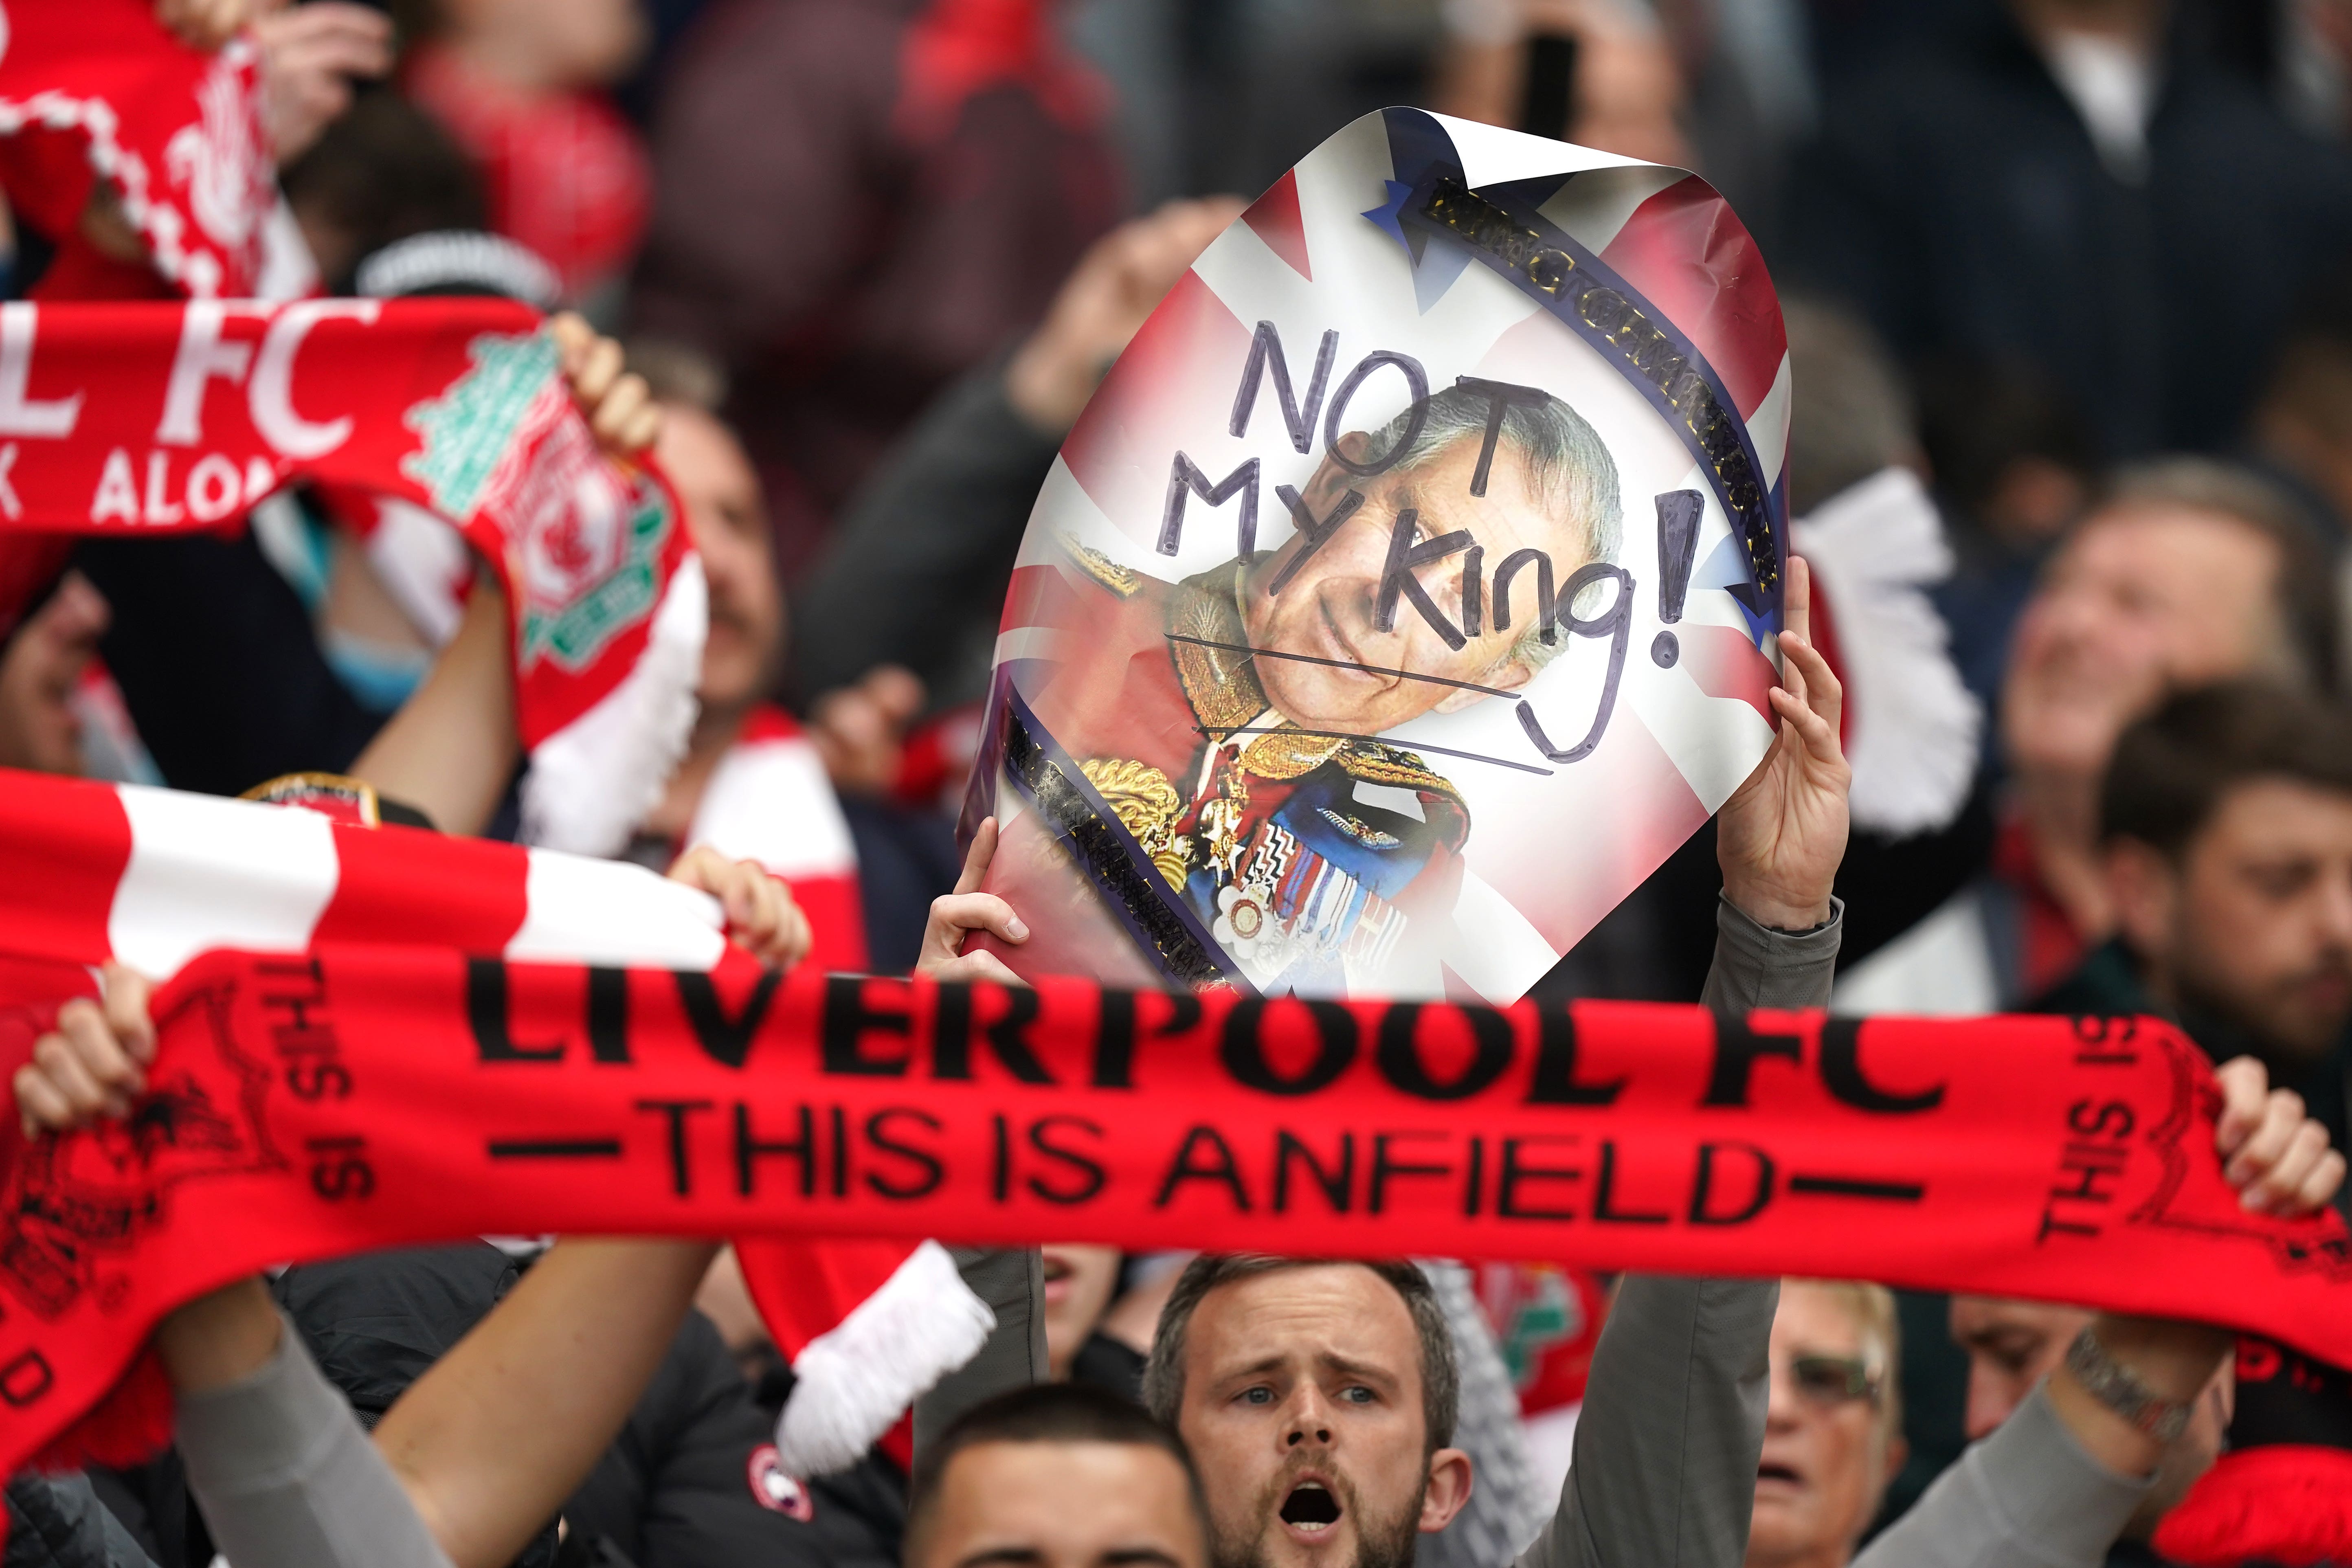 Thousands of Liverpool fans voiced their disapproval at the playing of the national anthem over the weekend